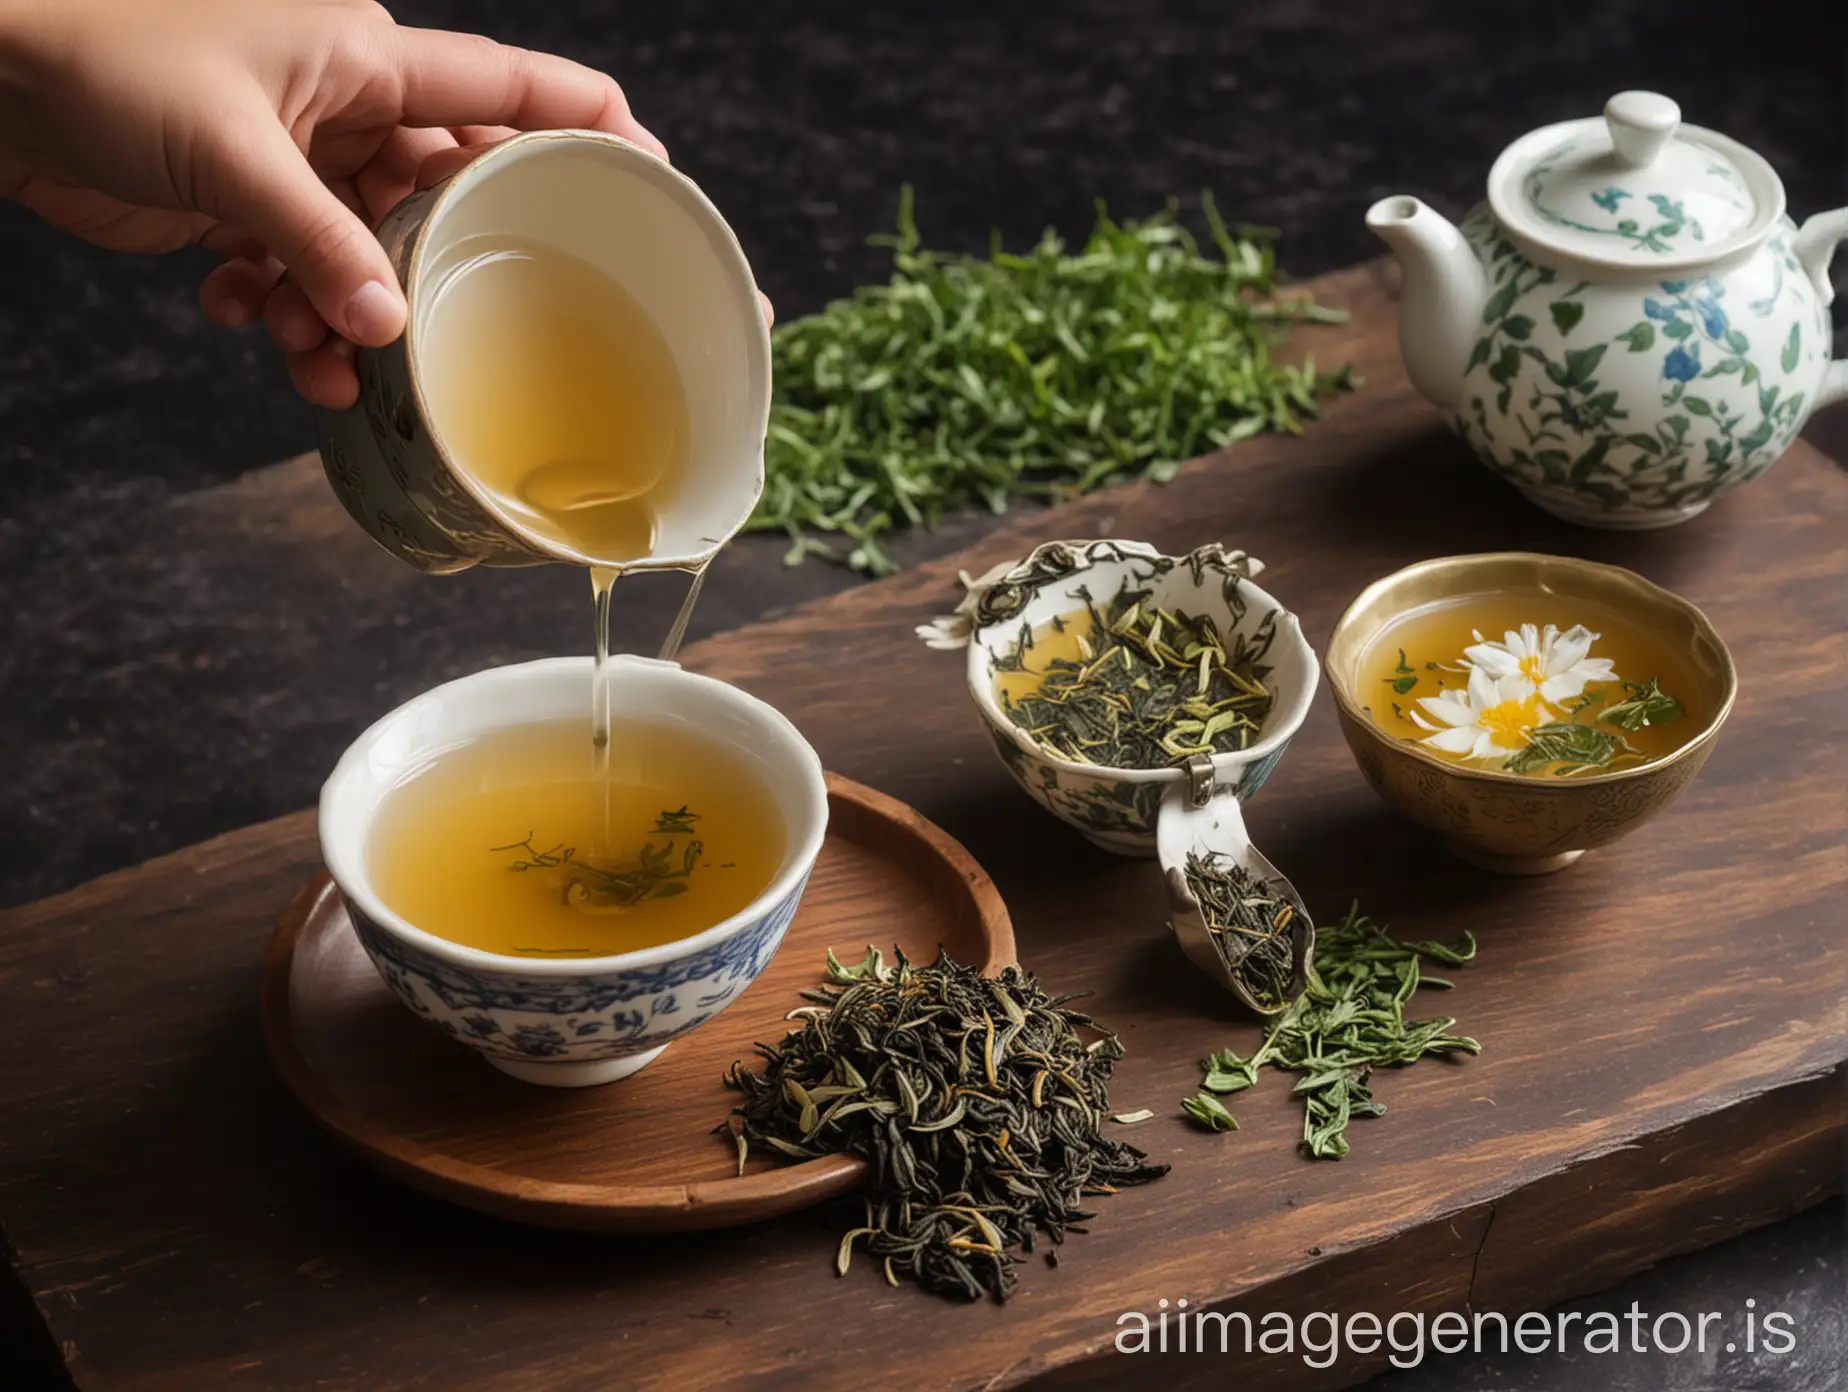 Brewing-Scented-Tea-with-Fragrant-Tea-Leaves-and-Aromatic-Soup